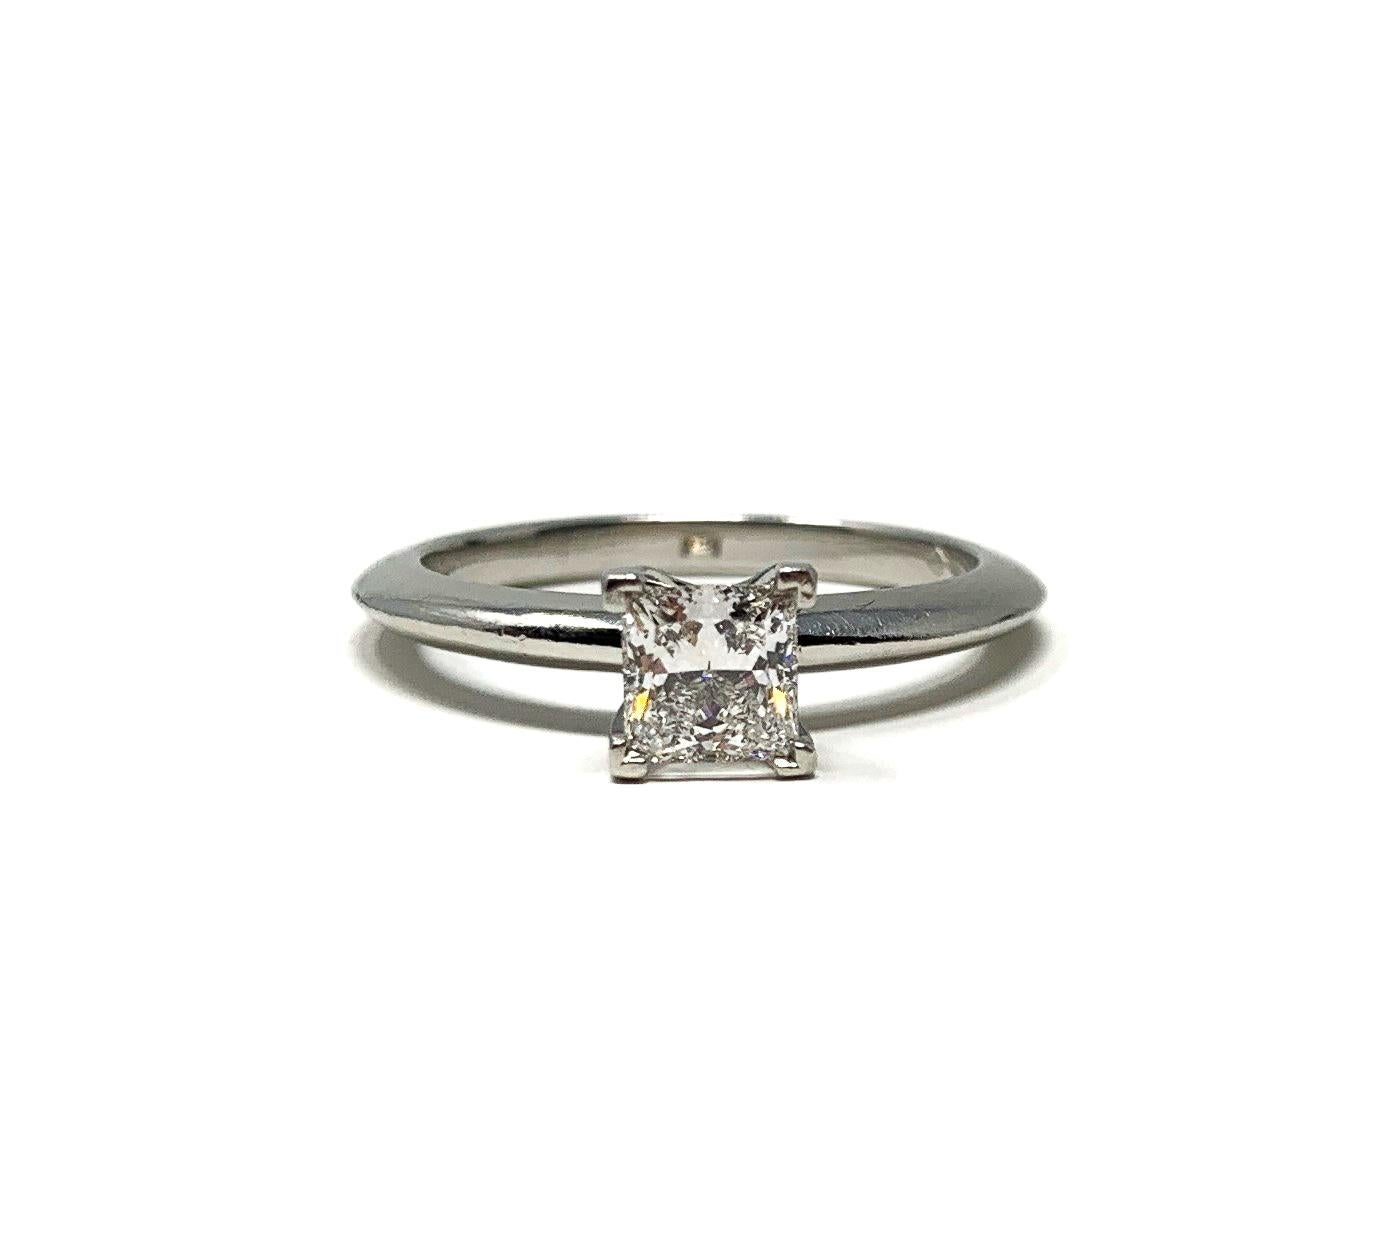 Tiffany & Co. .55ct Square Solitaire Diamond Engagement Ring G VS2 Size 5.75

Condition:  Excellent (Professionally Cleaned and Polished)
Metal:  Platinum 950 (Marked, and Professionally Tested)
Weight:  4.5g
Size:  5.75
Band Width:  2mm 
Ring